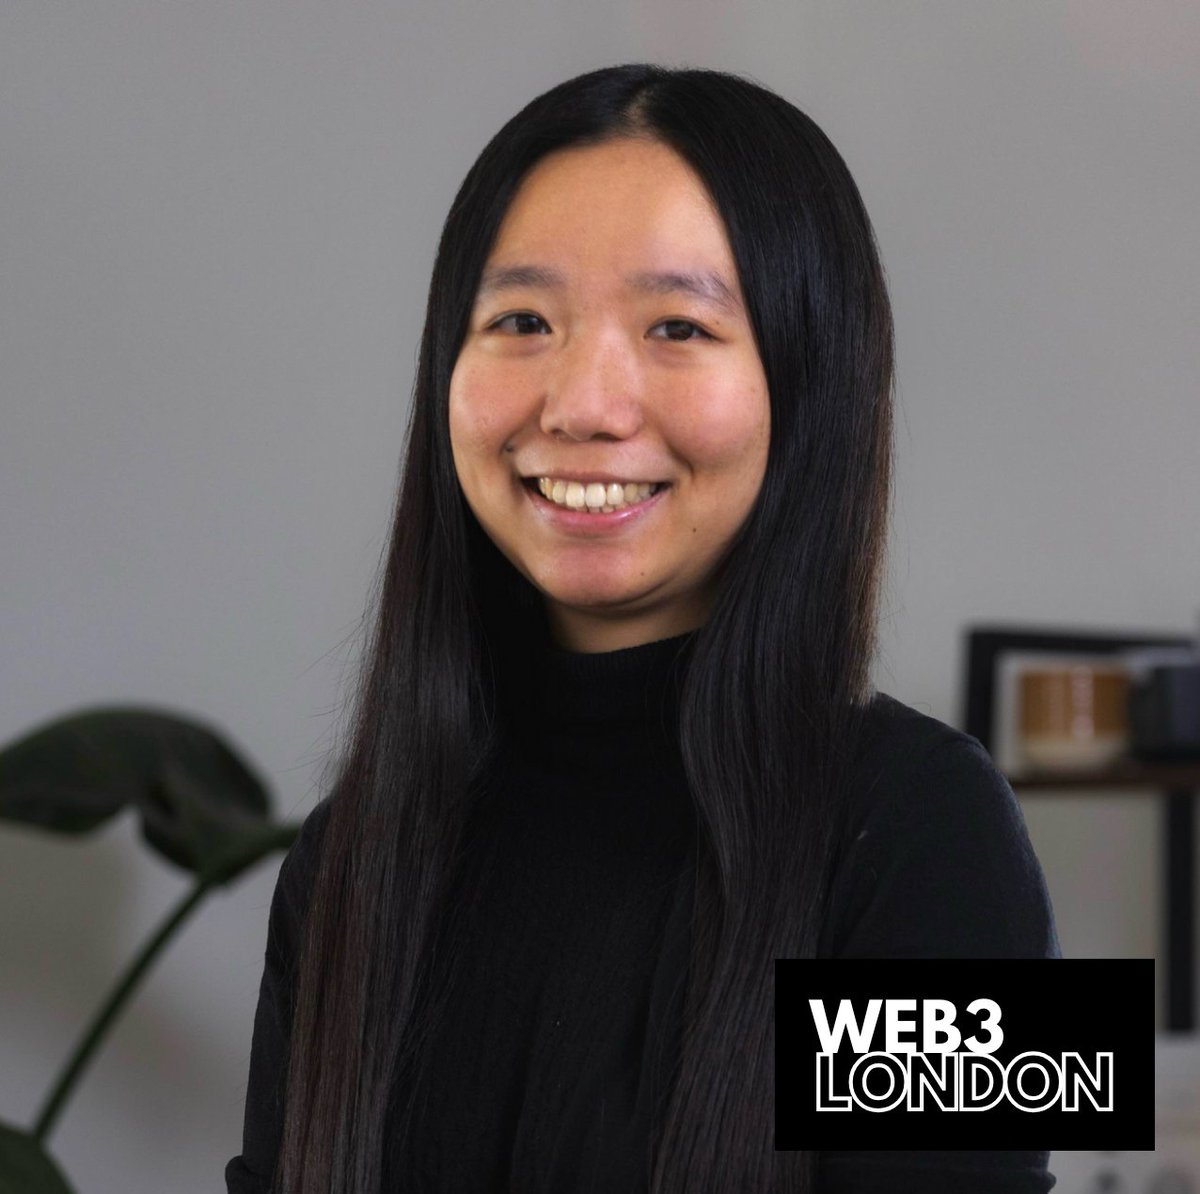 Last speaker announcement! 🇬🇧💂‍♂️ Last seats! RSVP now meetup.com/web3london/eve… Learn about the latest generation of AI music from Nina Ma, Master's student in Cognitive Science majoring in AI and Neuroinformatics. Event hosted at @BarclaysUK #web3 #london ✨🚀